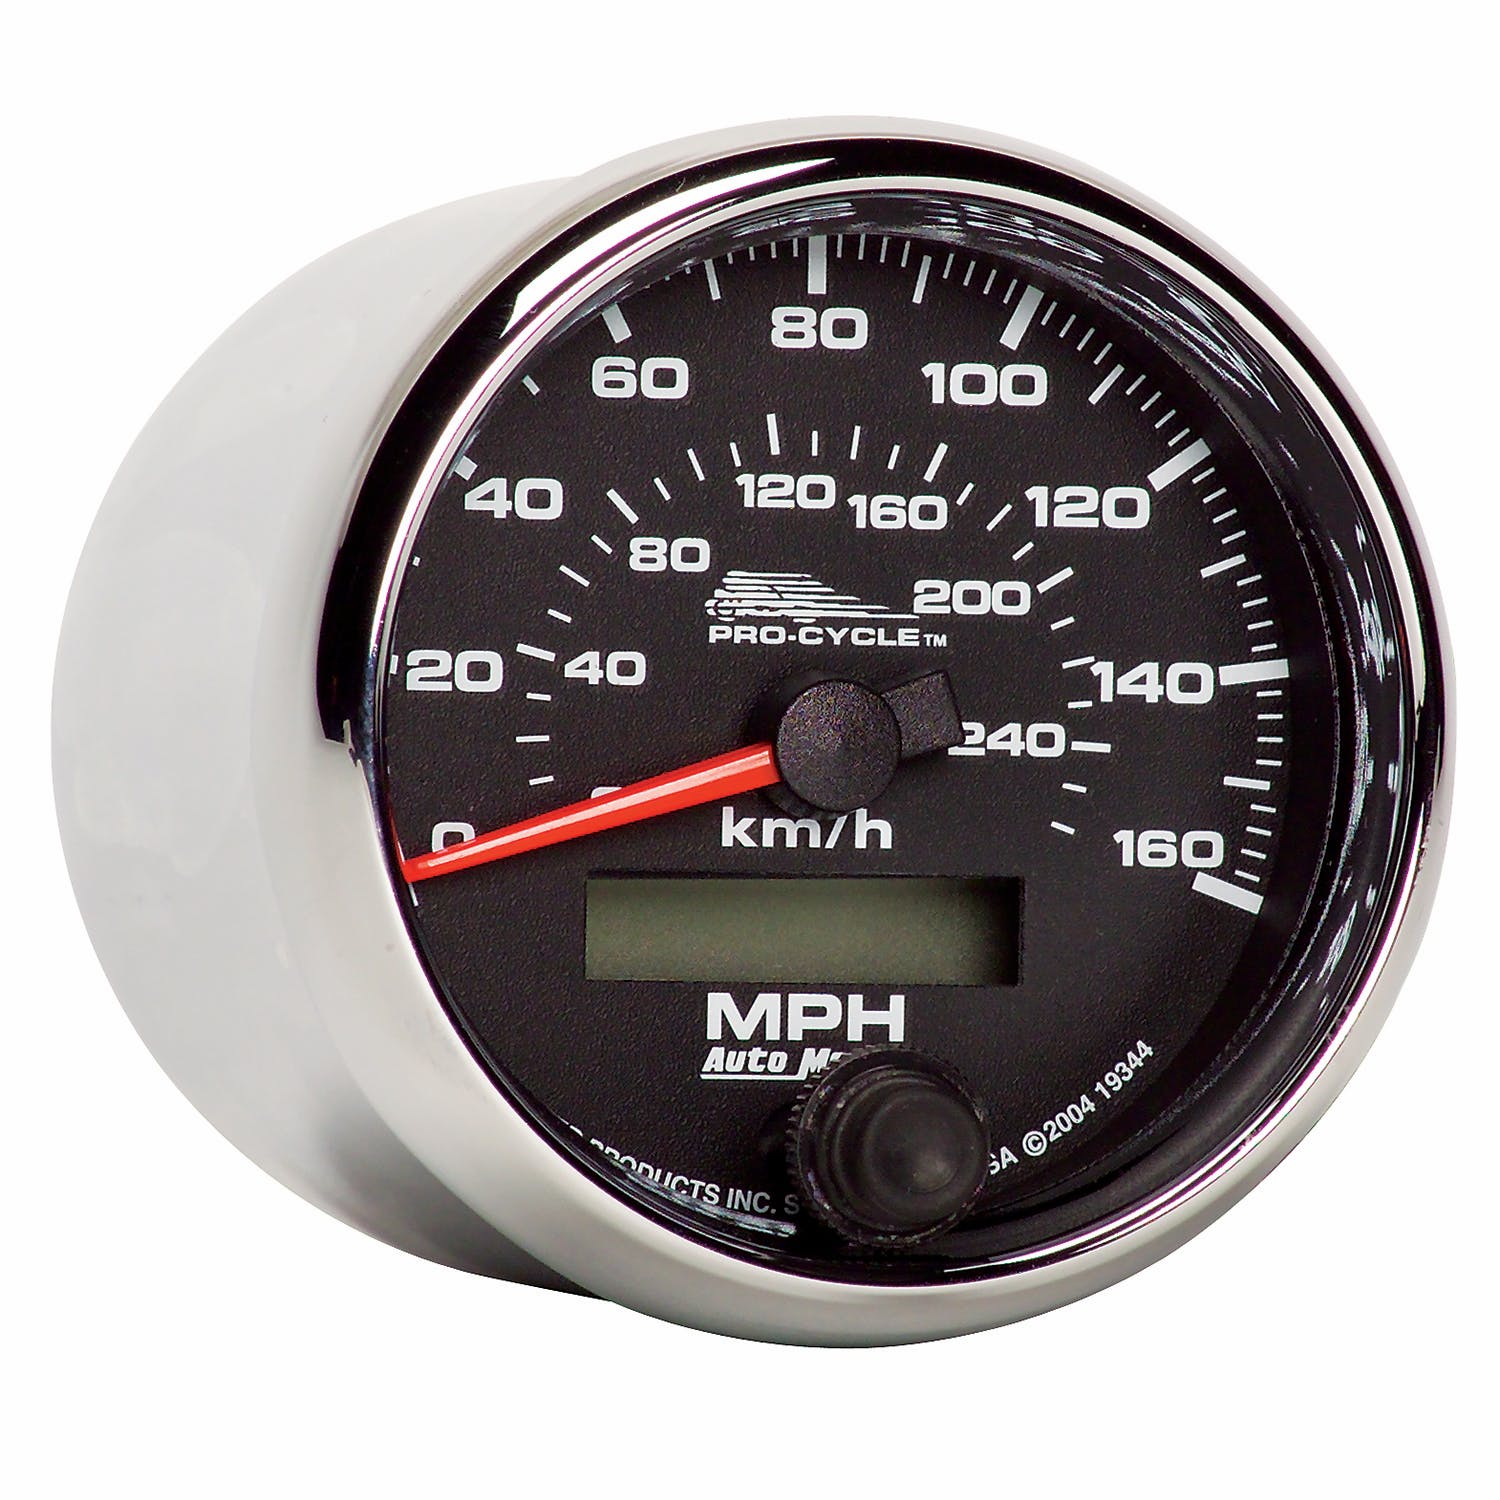 AutoMeter Products 19344 Speedometer Gauge, Electric Black-Pro Cycle 2 5/8, 160 MPH/260KMH